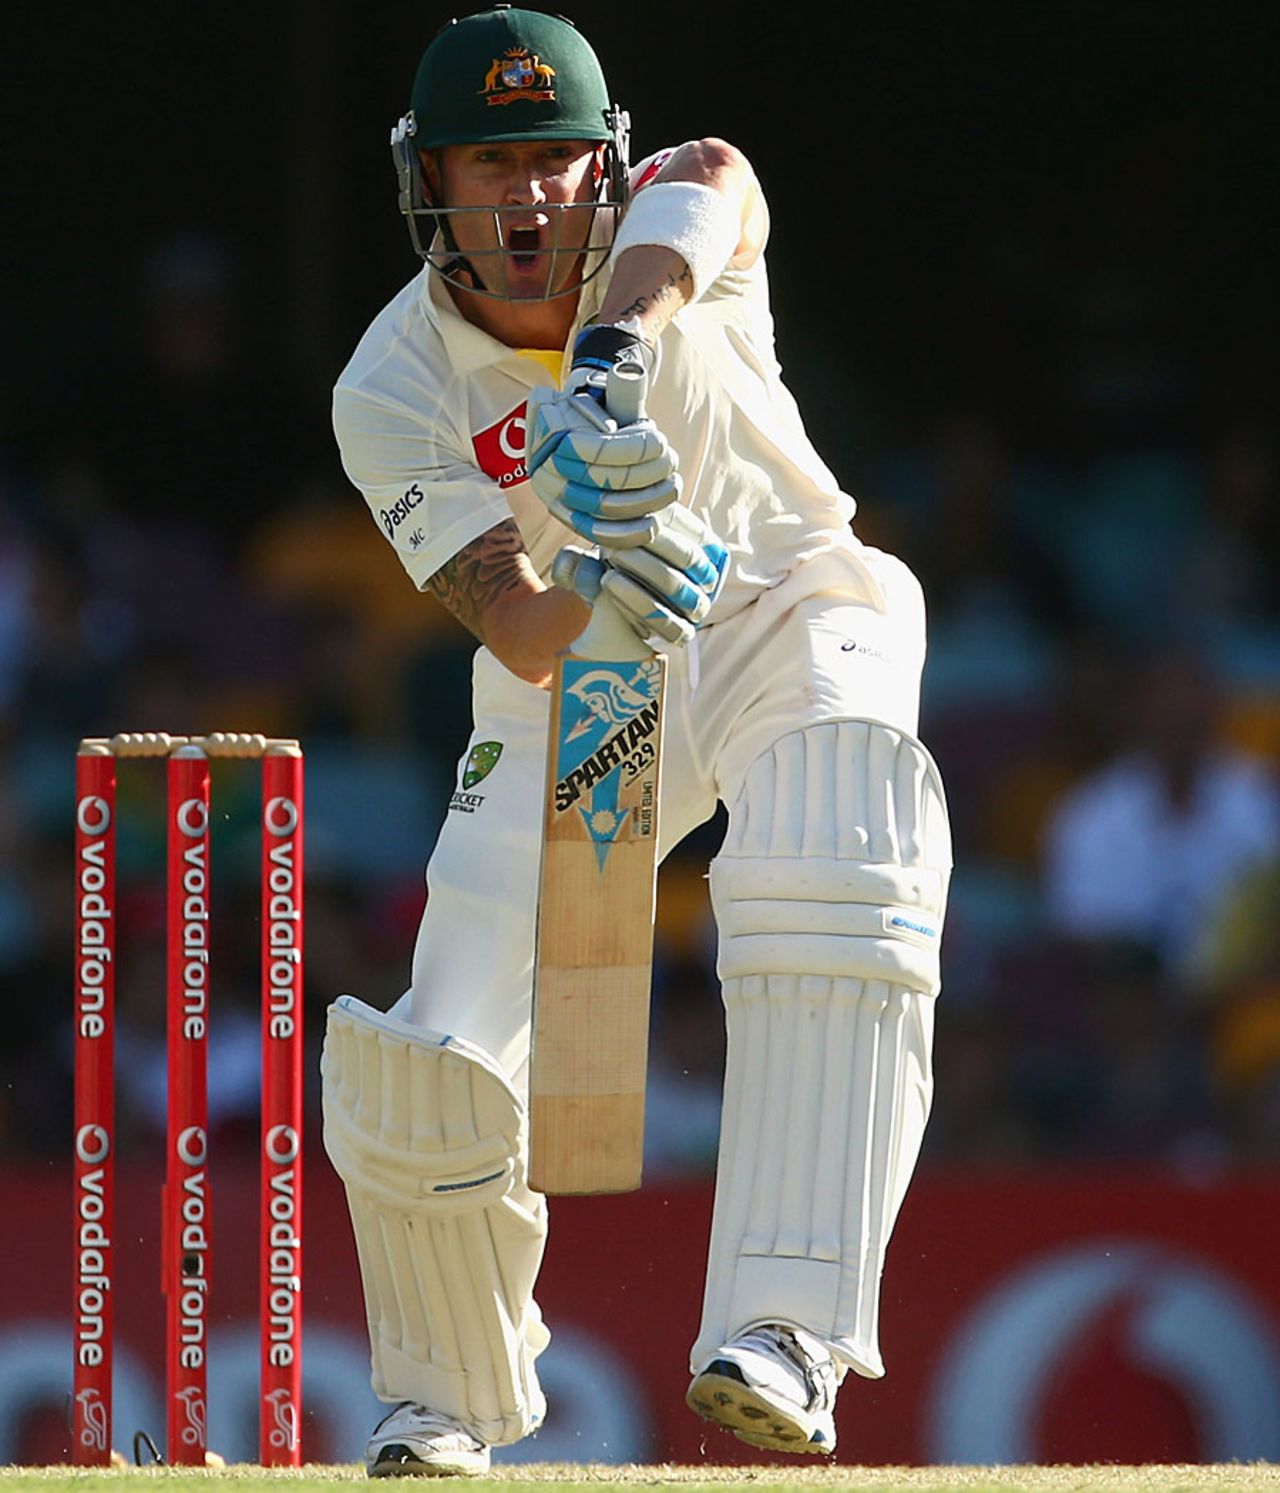 Michael Clarke calls out loud after playing a defensive shot, Australia v South Africa, 1st Test, 3rd day, Brisbane, November 11, 2012